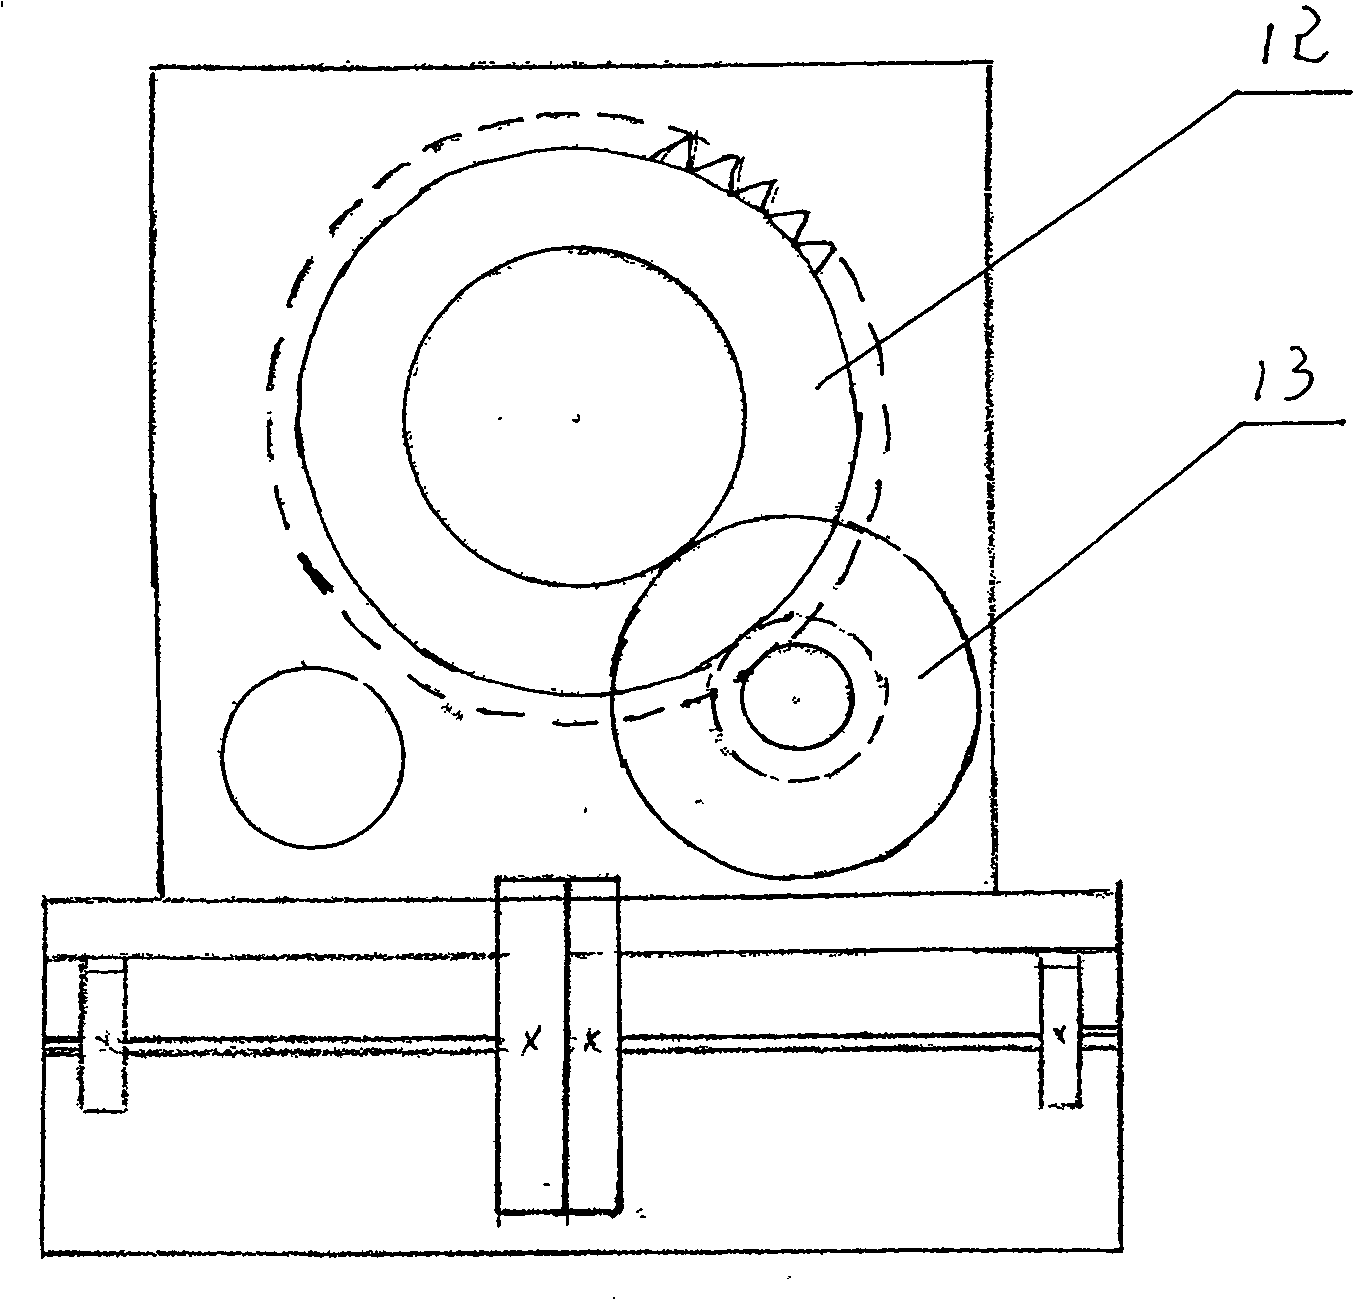 Material charging and discharging device for production of metal magnesium